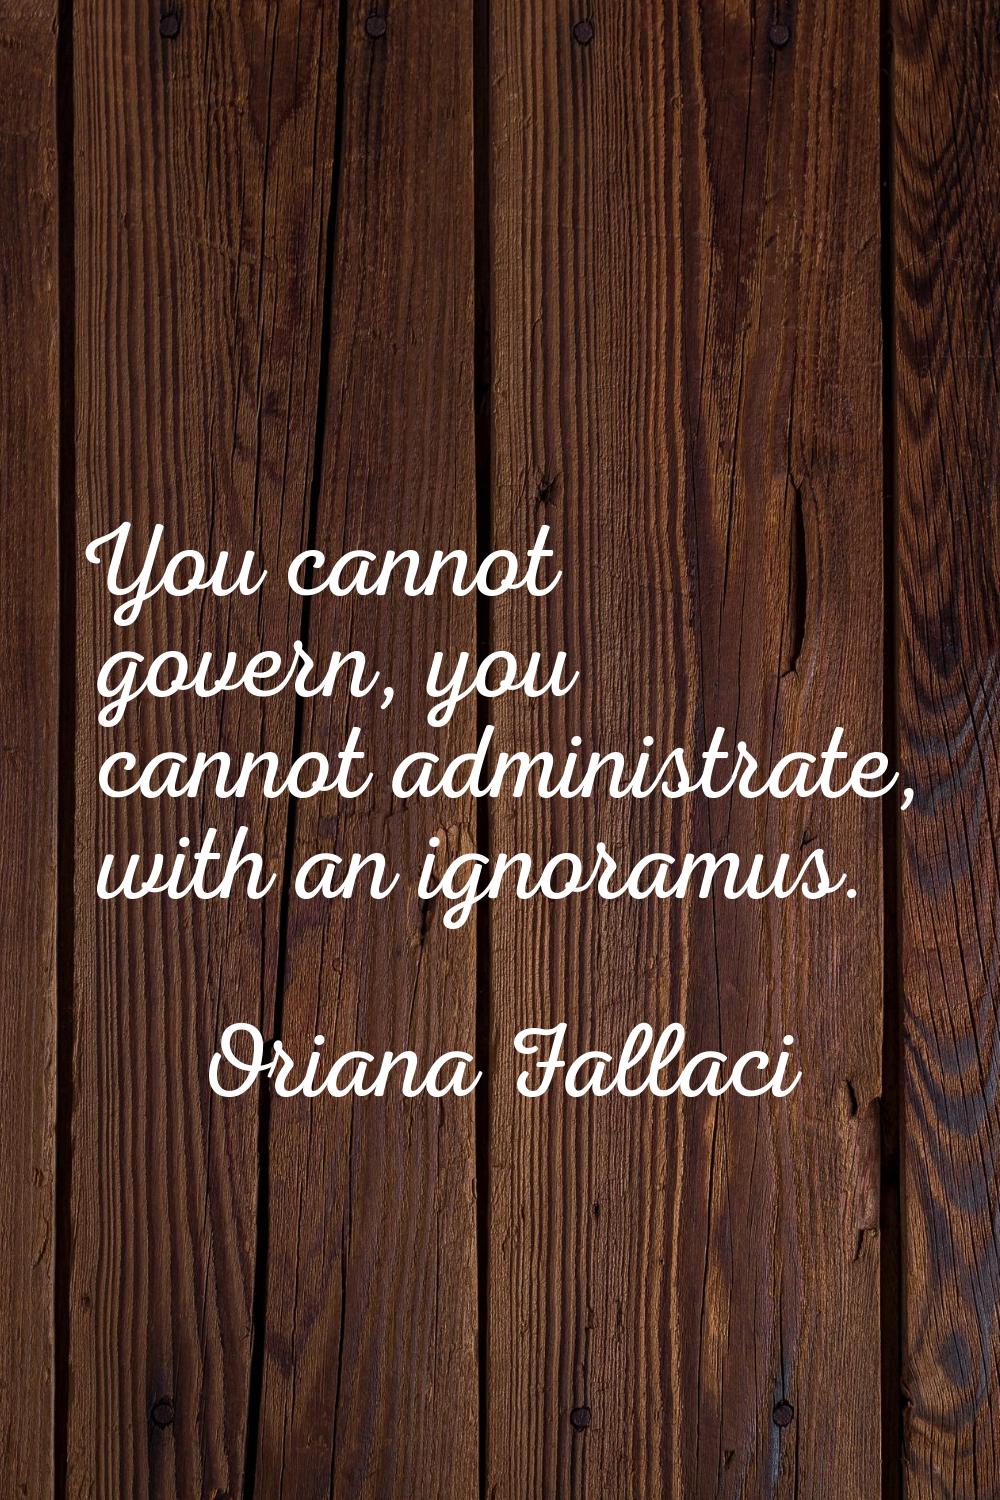 You cannot govern, you cannot administrate, with an ignoramus.